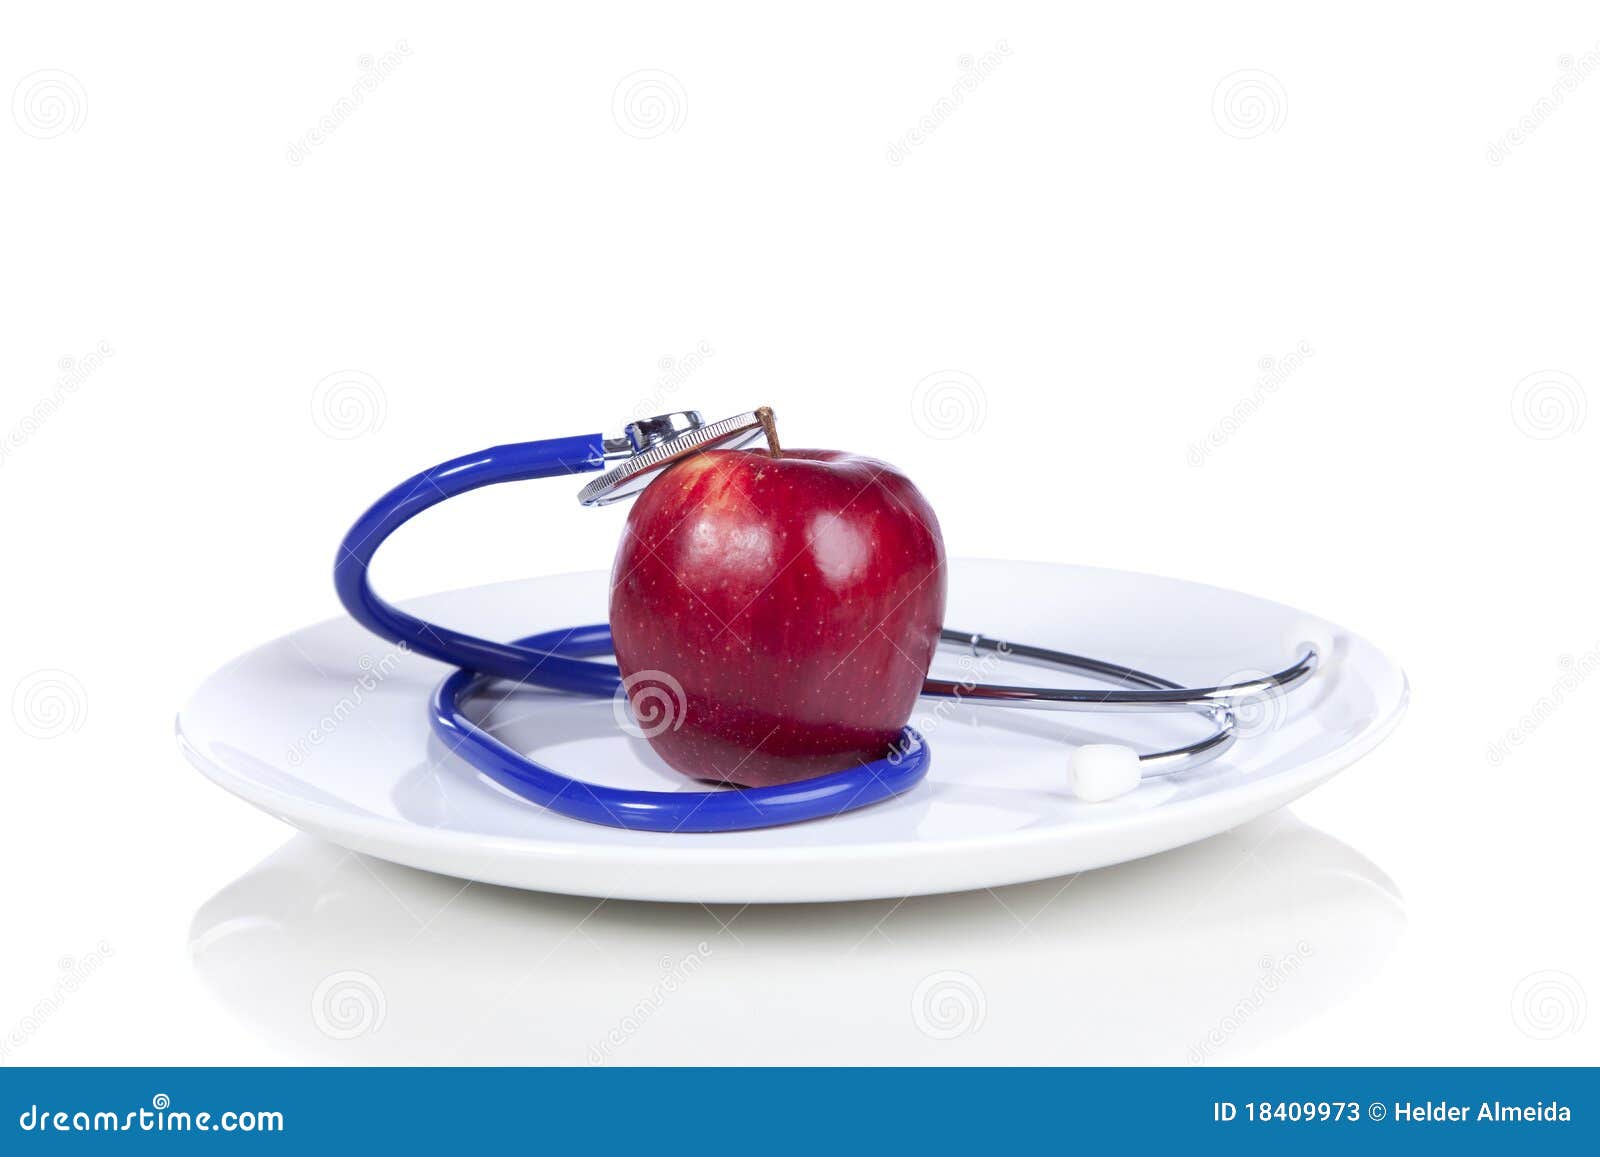 Healthy Food Gives You A Good Life Stock Photos - Image: 18409973